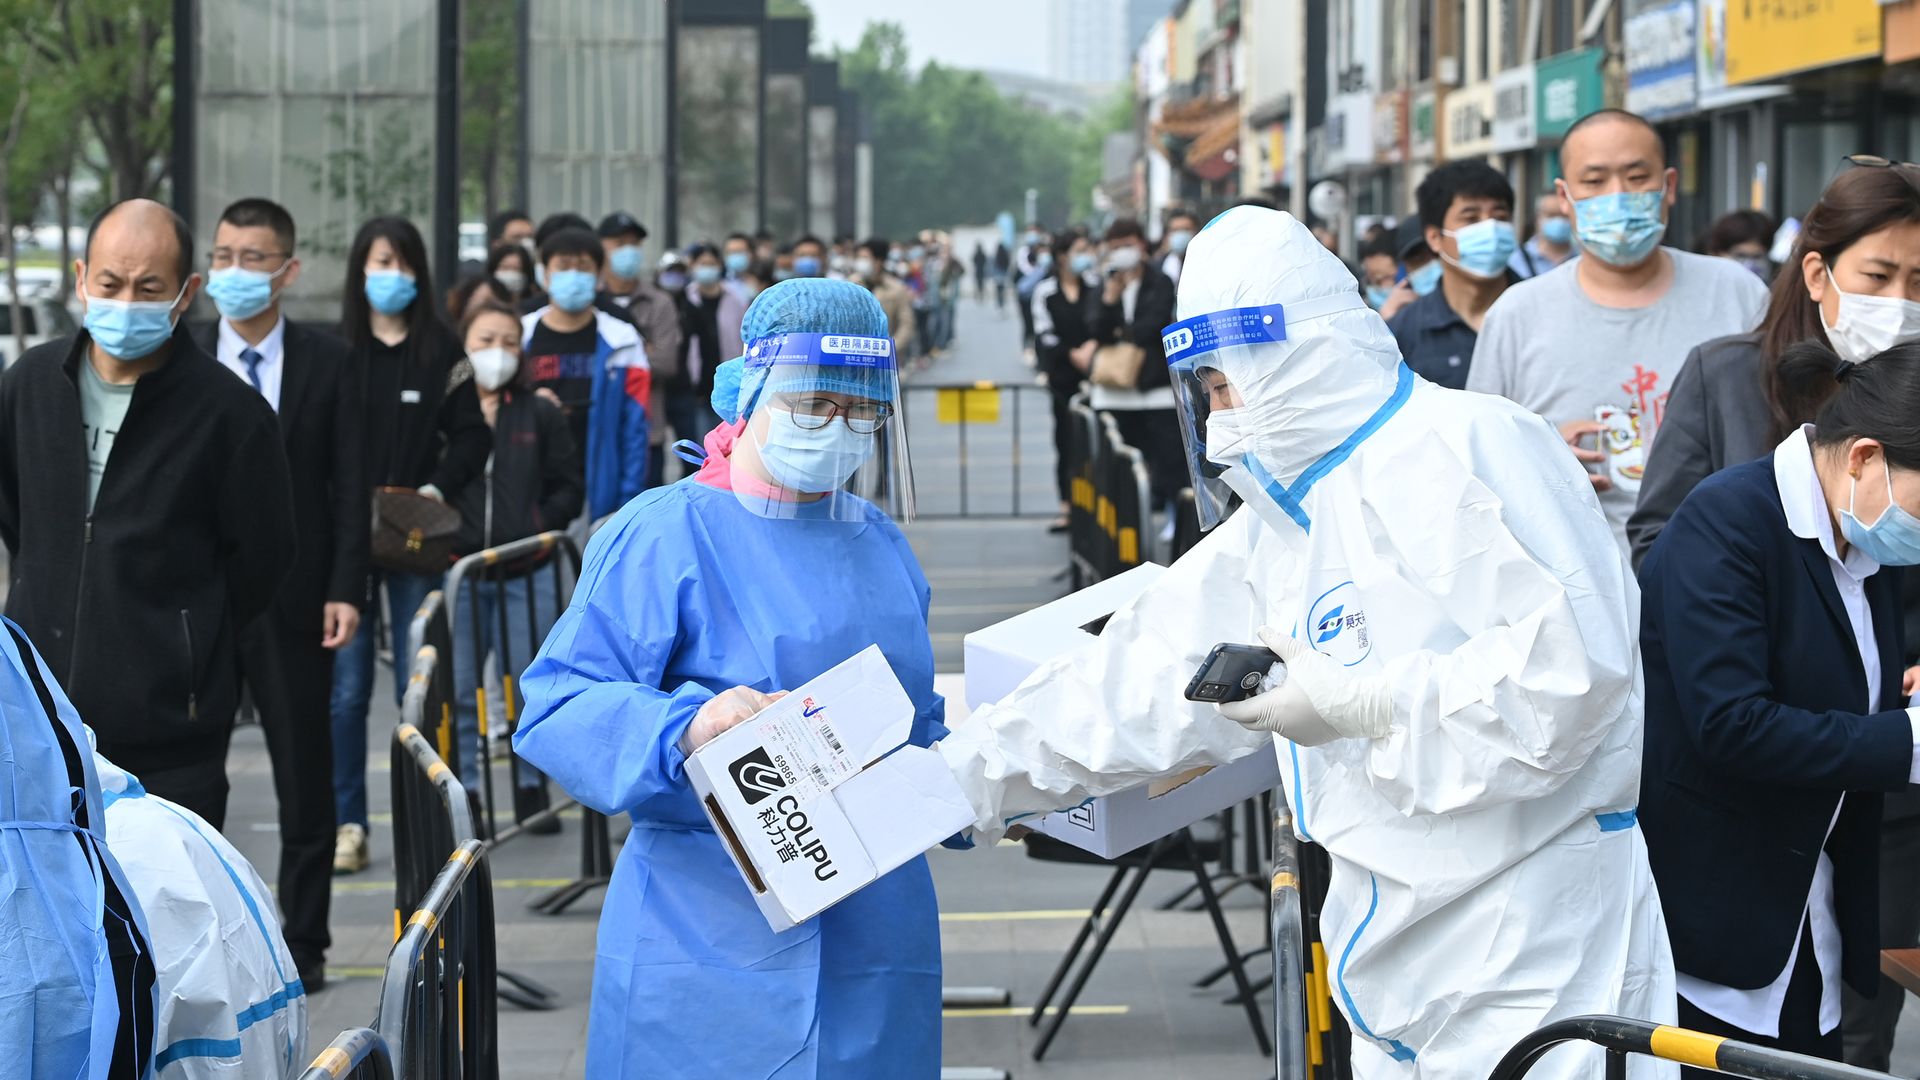 People queue up at a COVID-19 nucleic acid testing site on April 25 in Beijing.